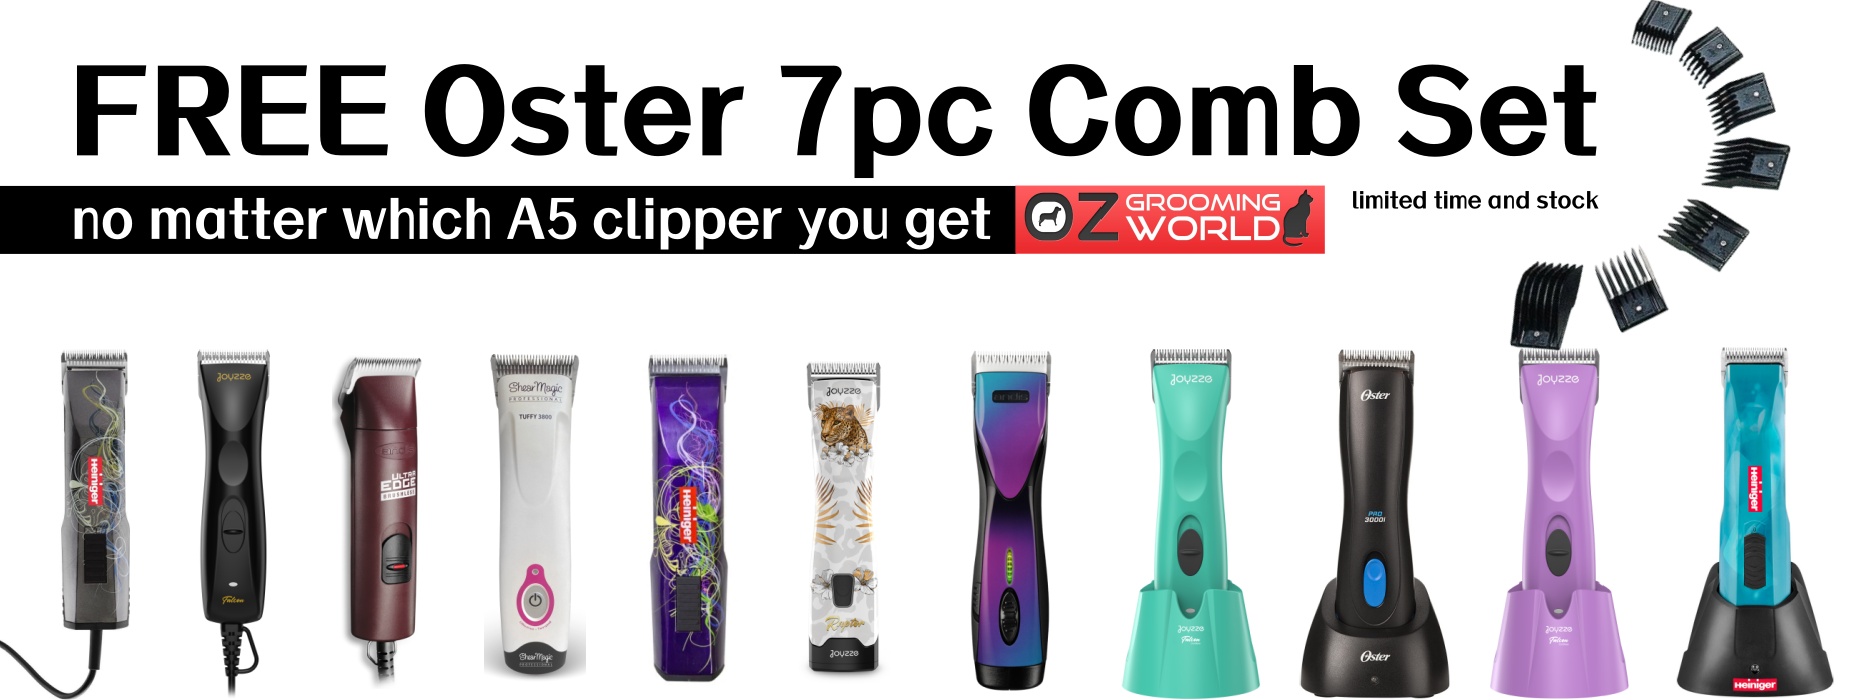 free oster 7pc comb